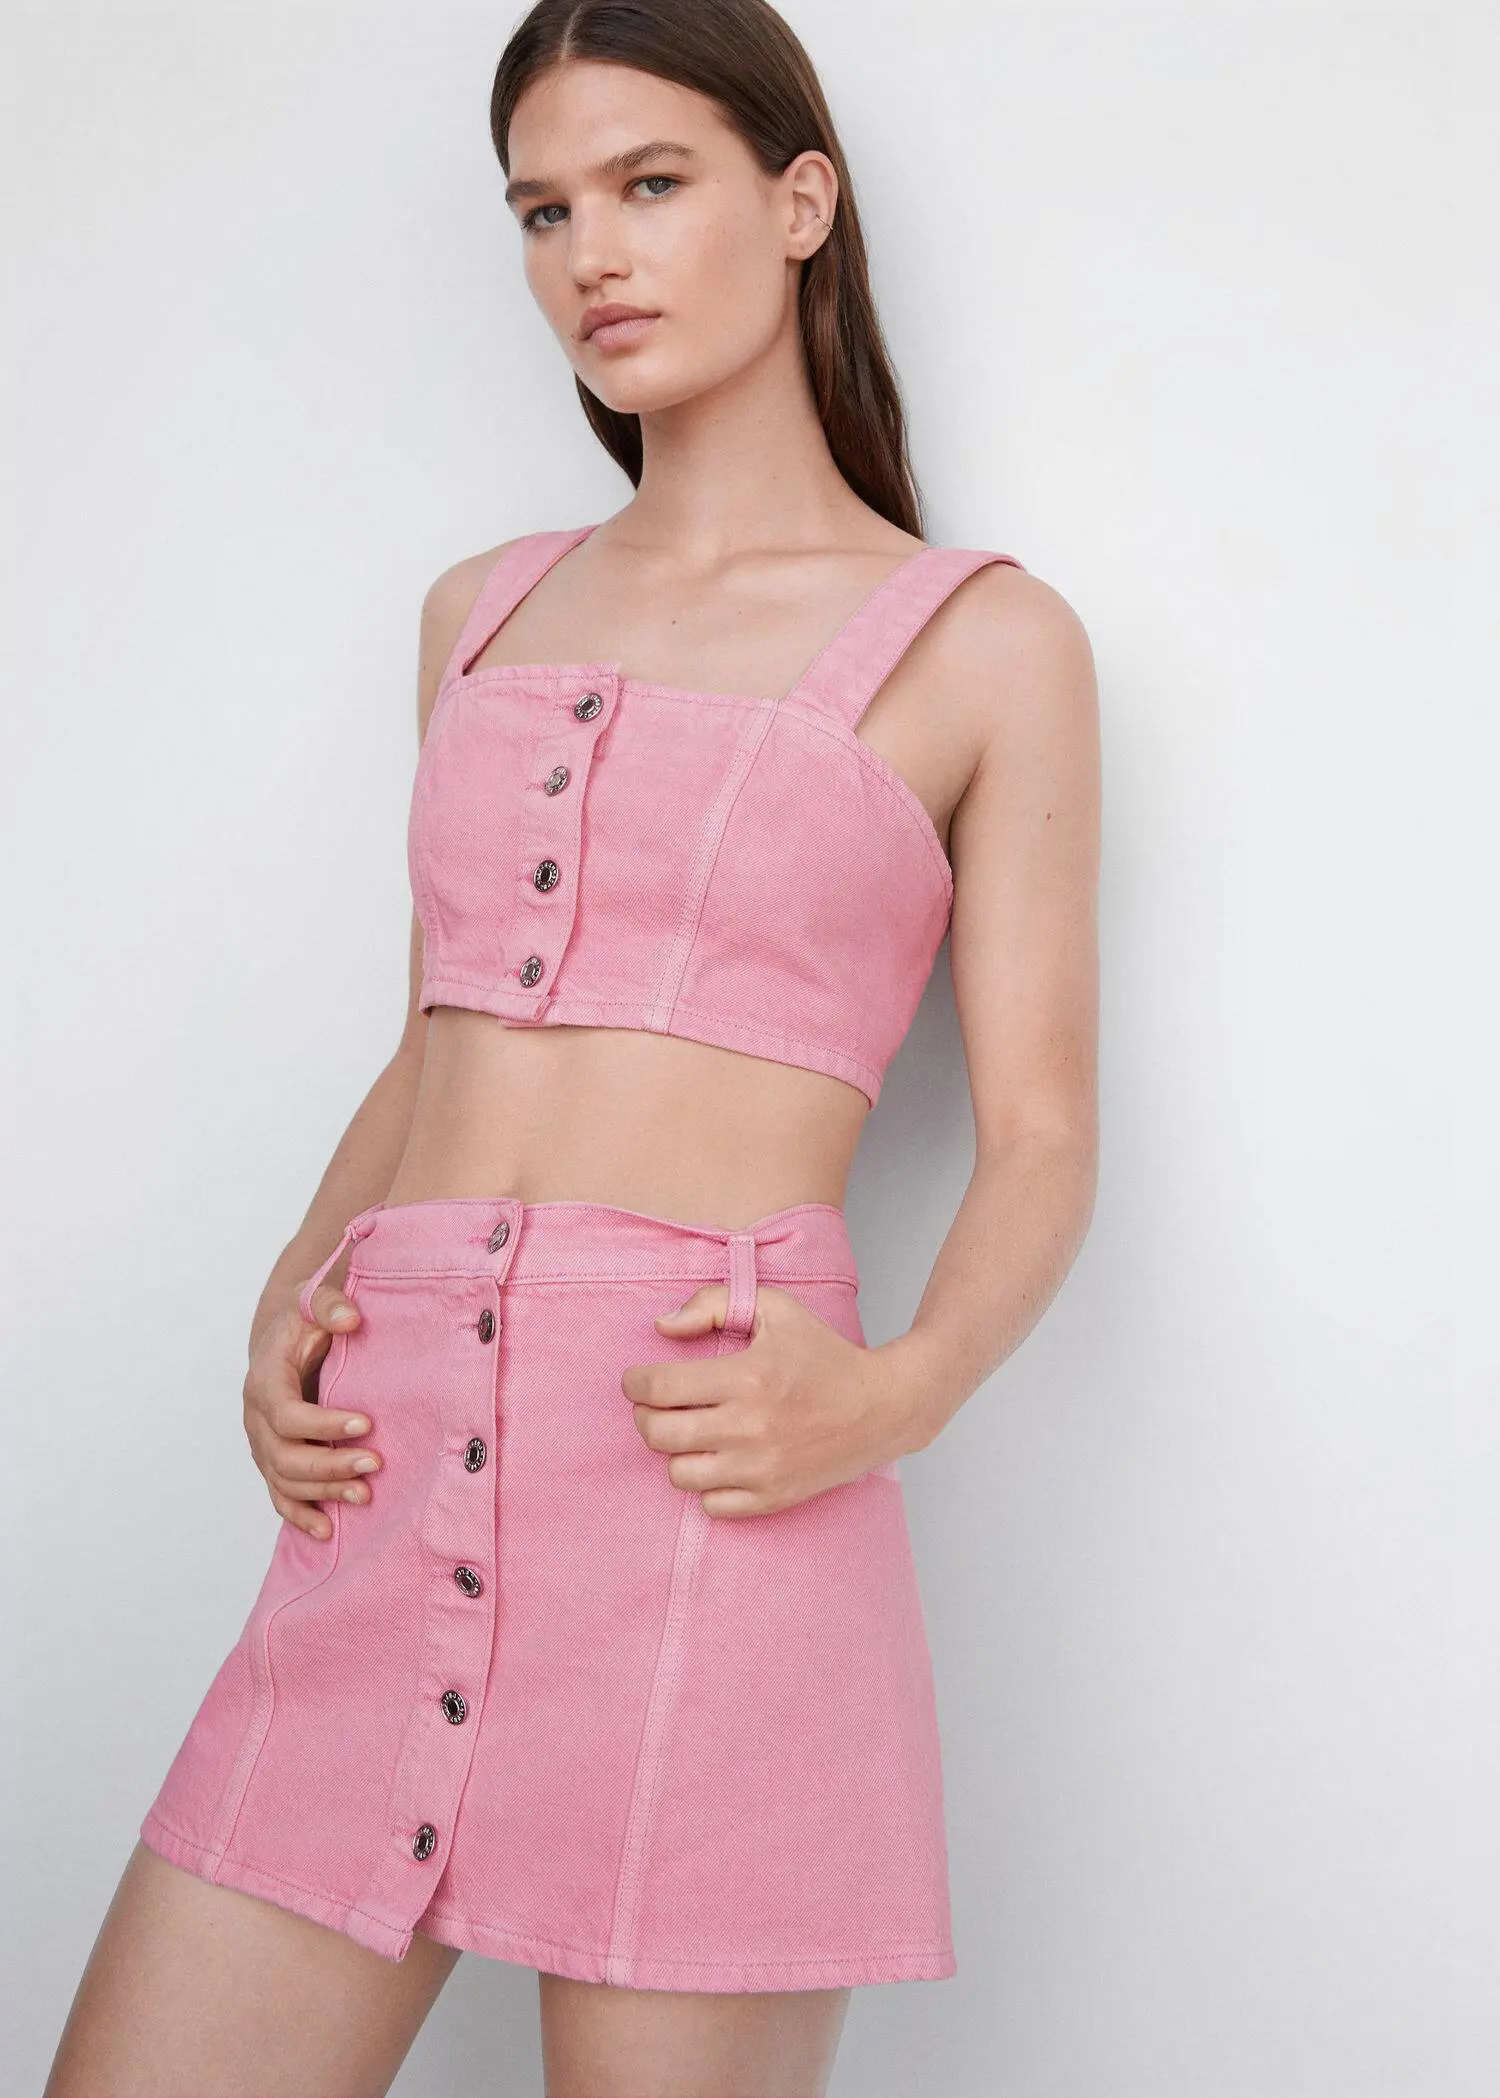 Mango Denim crop top. a woman wearing a pink outfit standing next to a wall. 